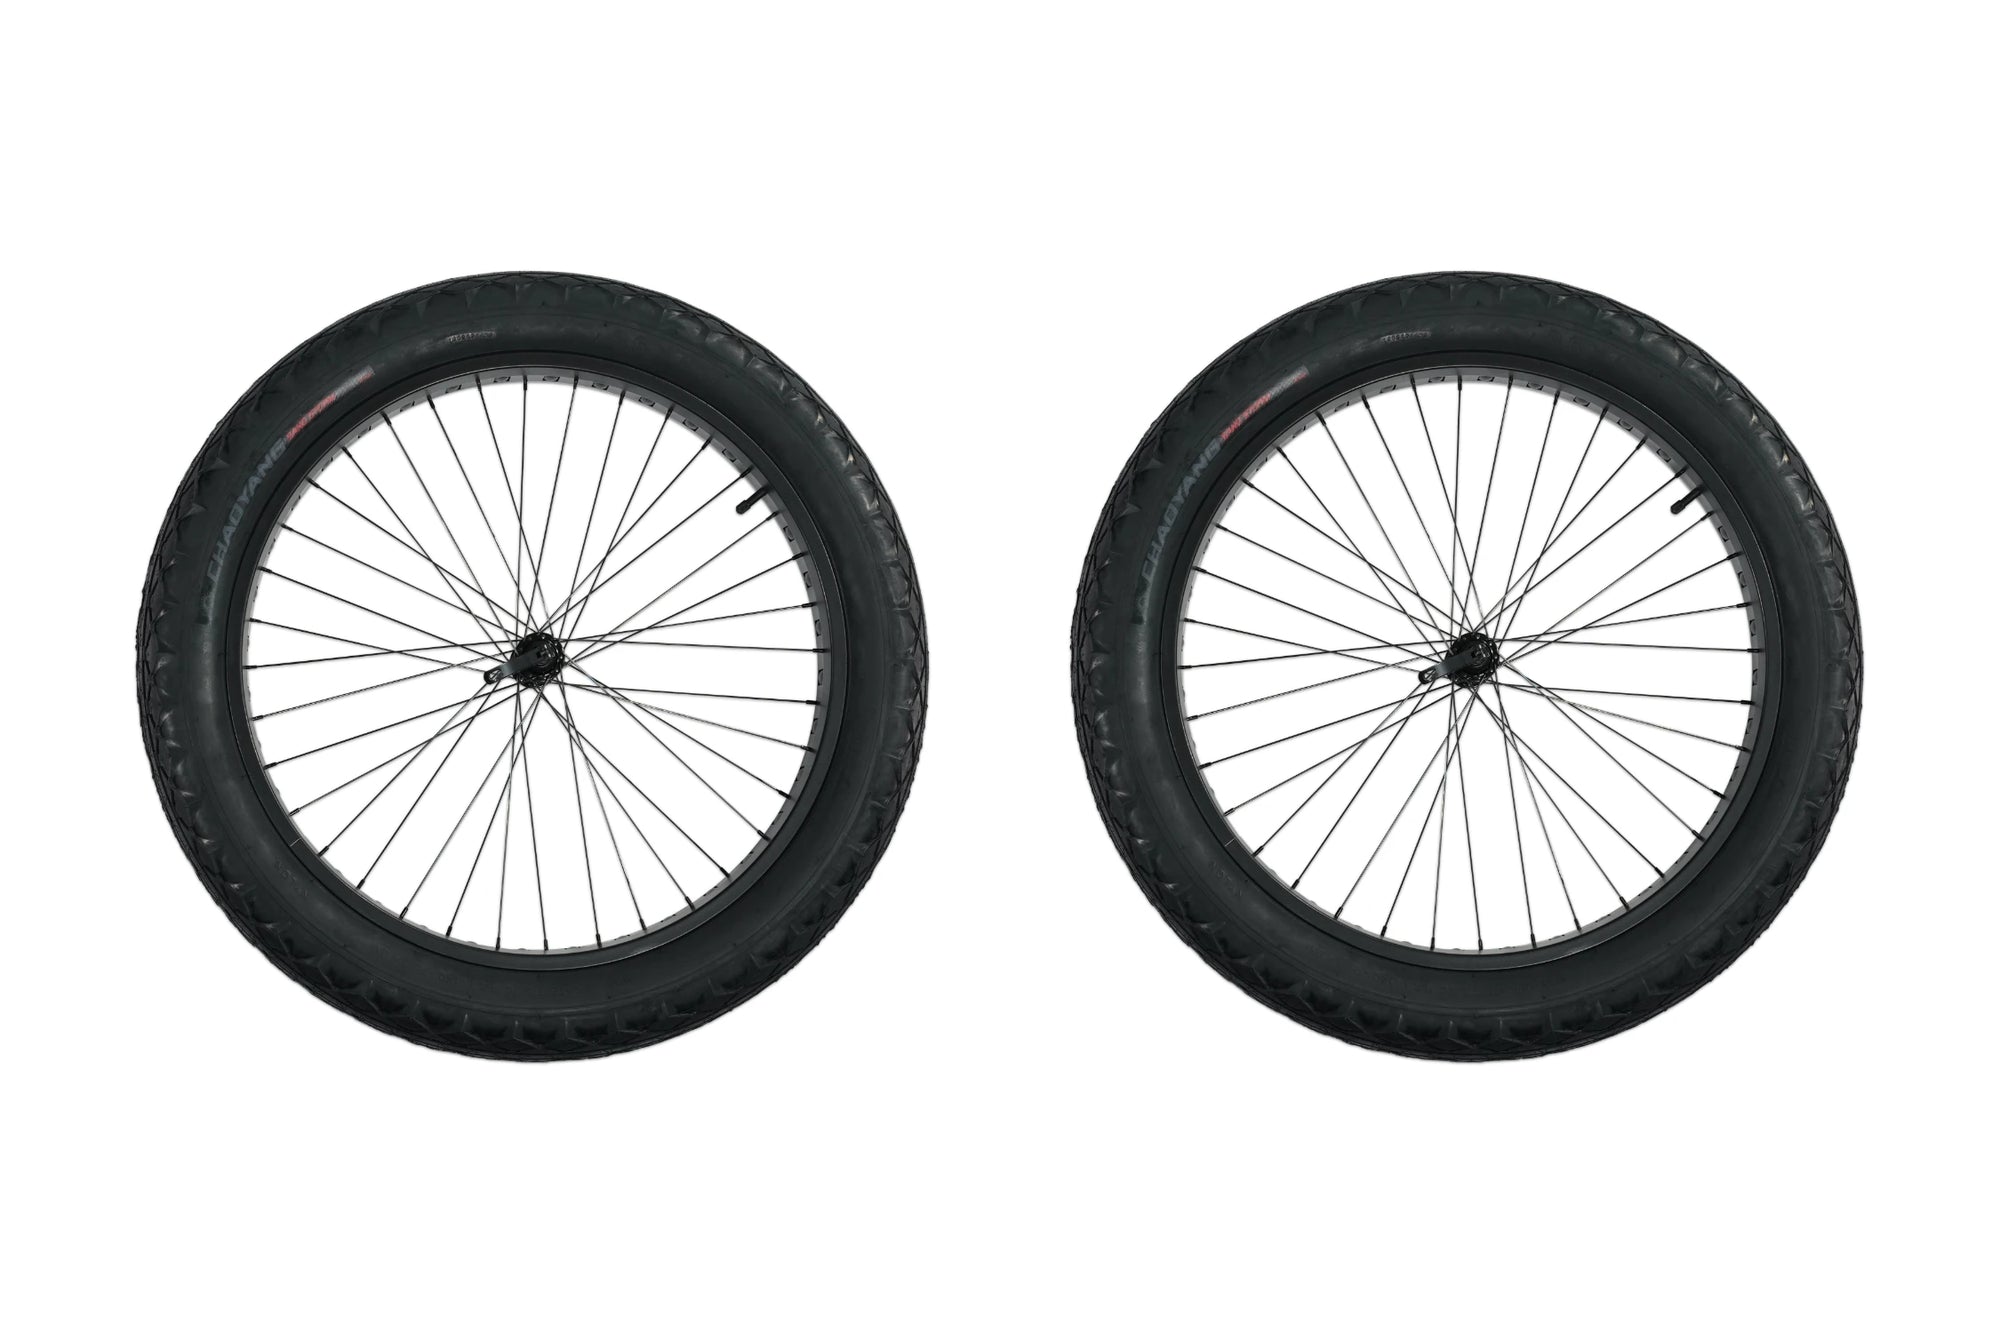 Wheelsets for reacha bicycle trailers